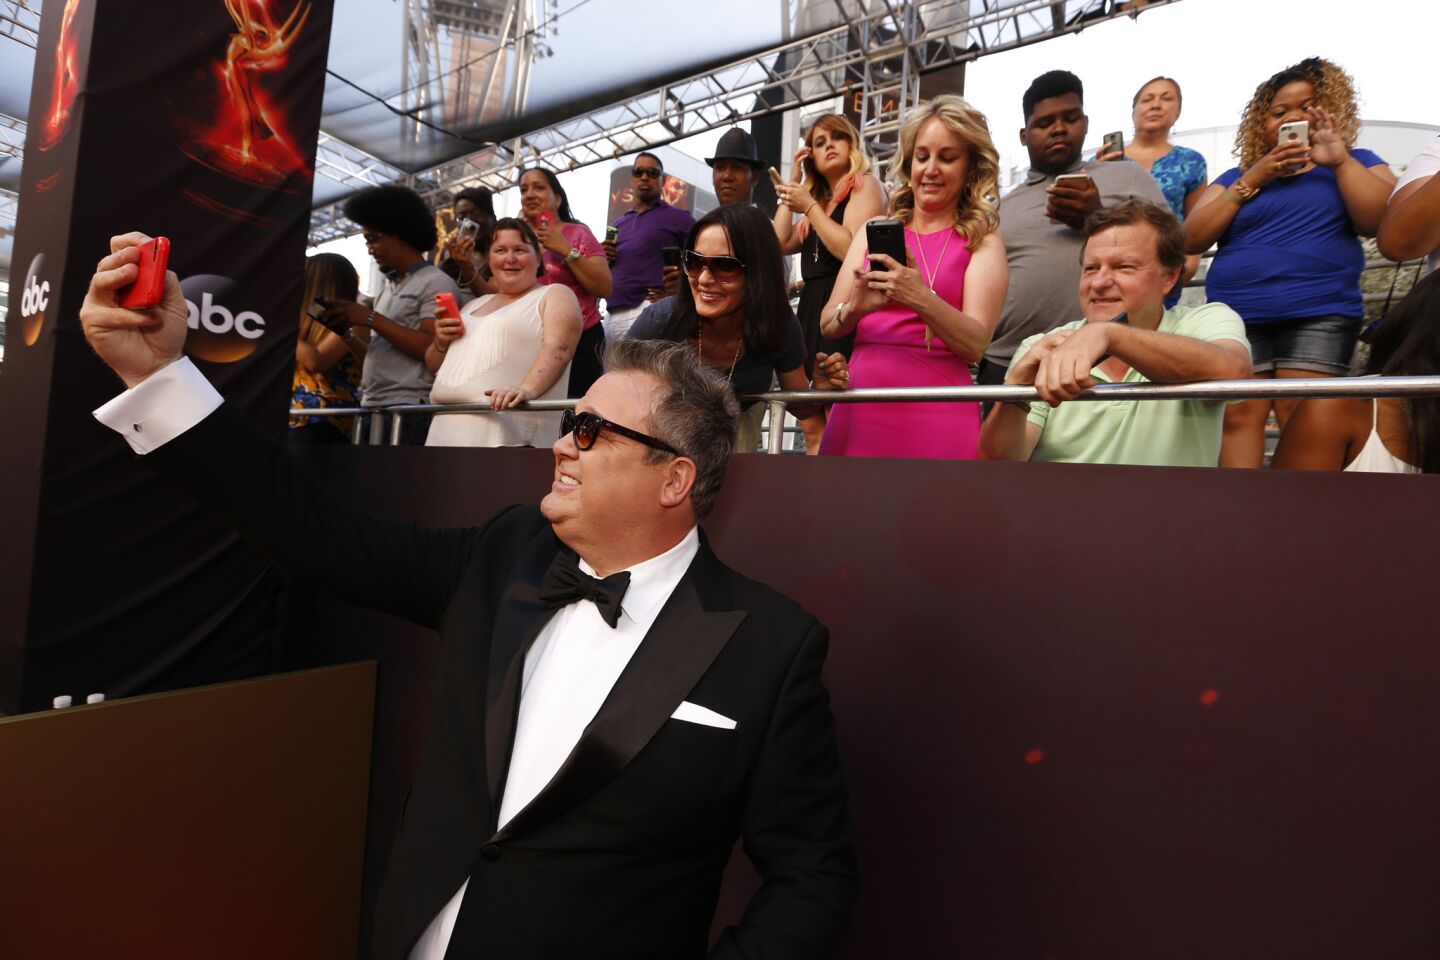 Eric Stonestreet takes a selfie with fans.